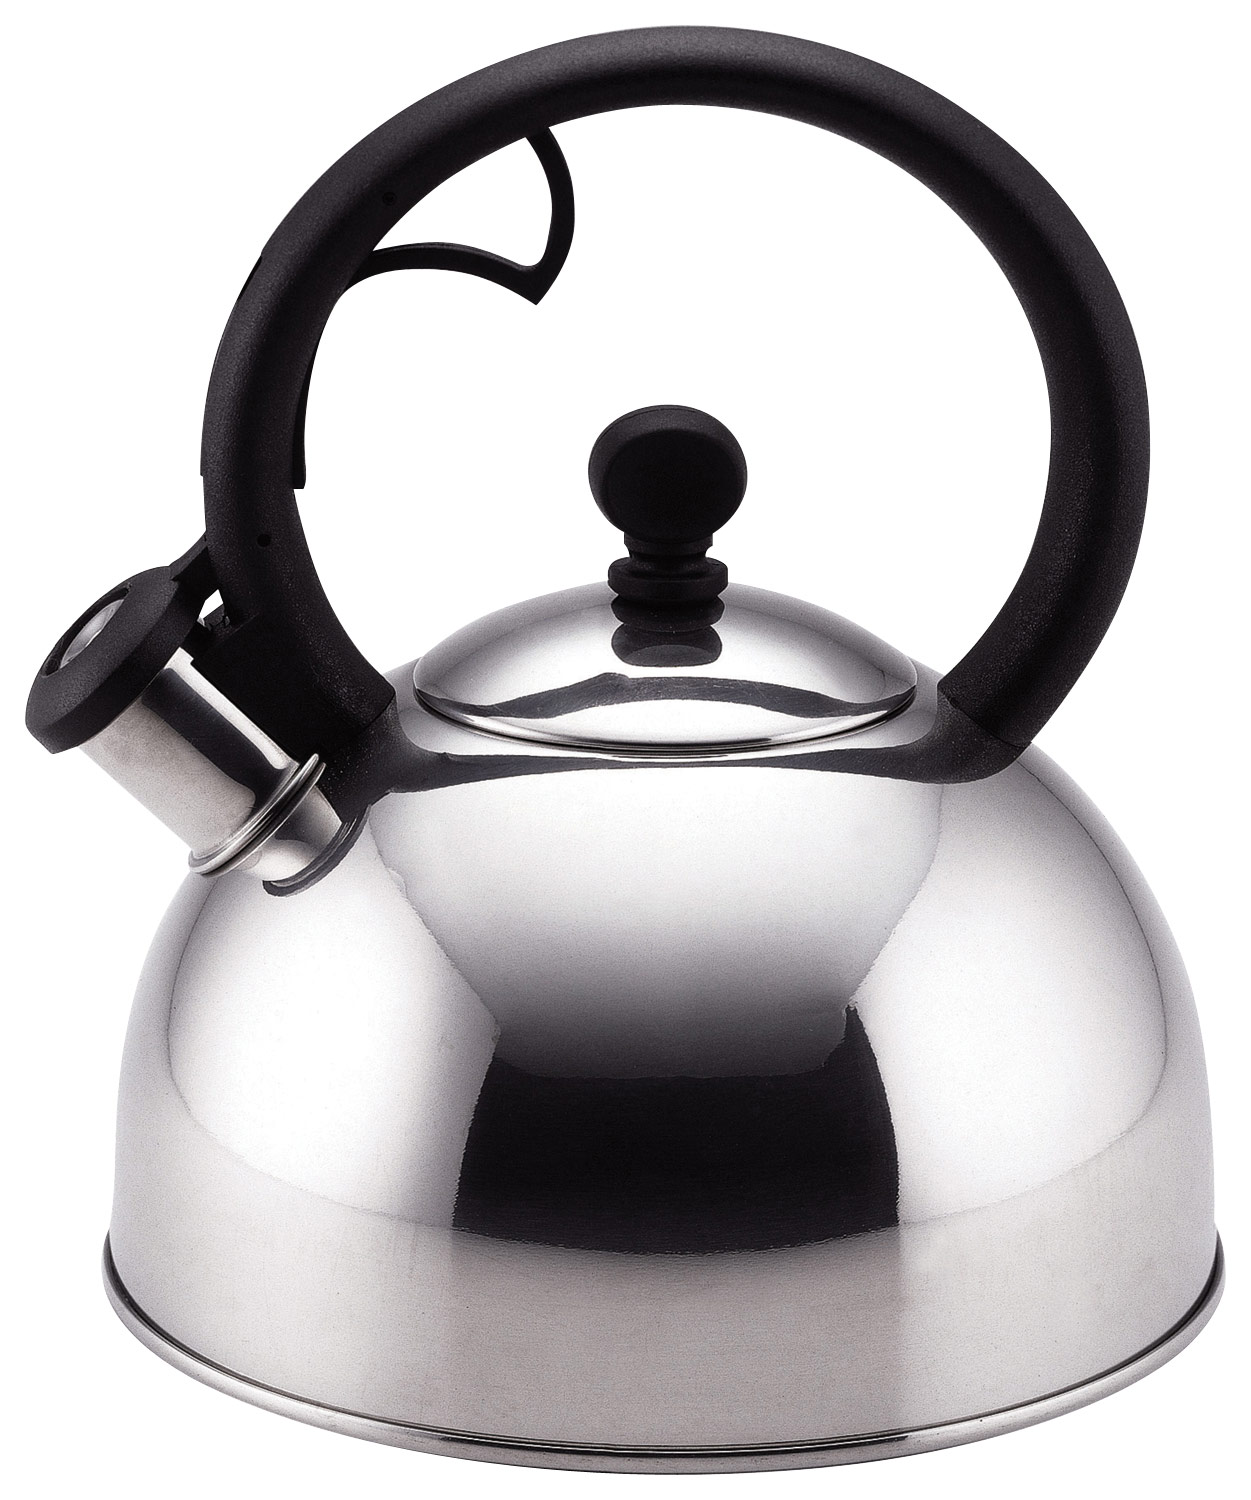  Farberware Dome Tea Kettle, Whistling Teapot, Porcelain Enamel  on Carbon Steel, BPA-Free, Rust-Proof, Cool Handle, 3 qt, 12 Cup Capacity,  Red: Home & Kitchen